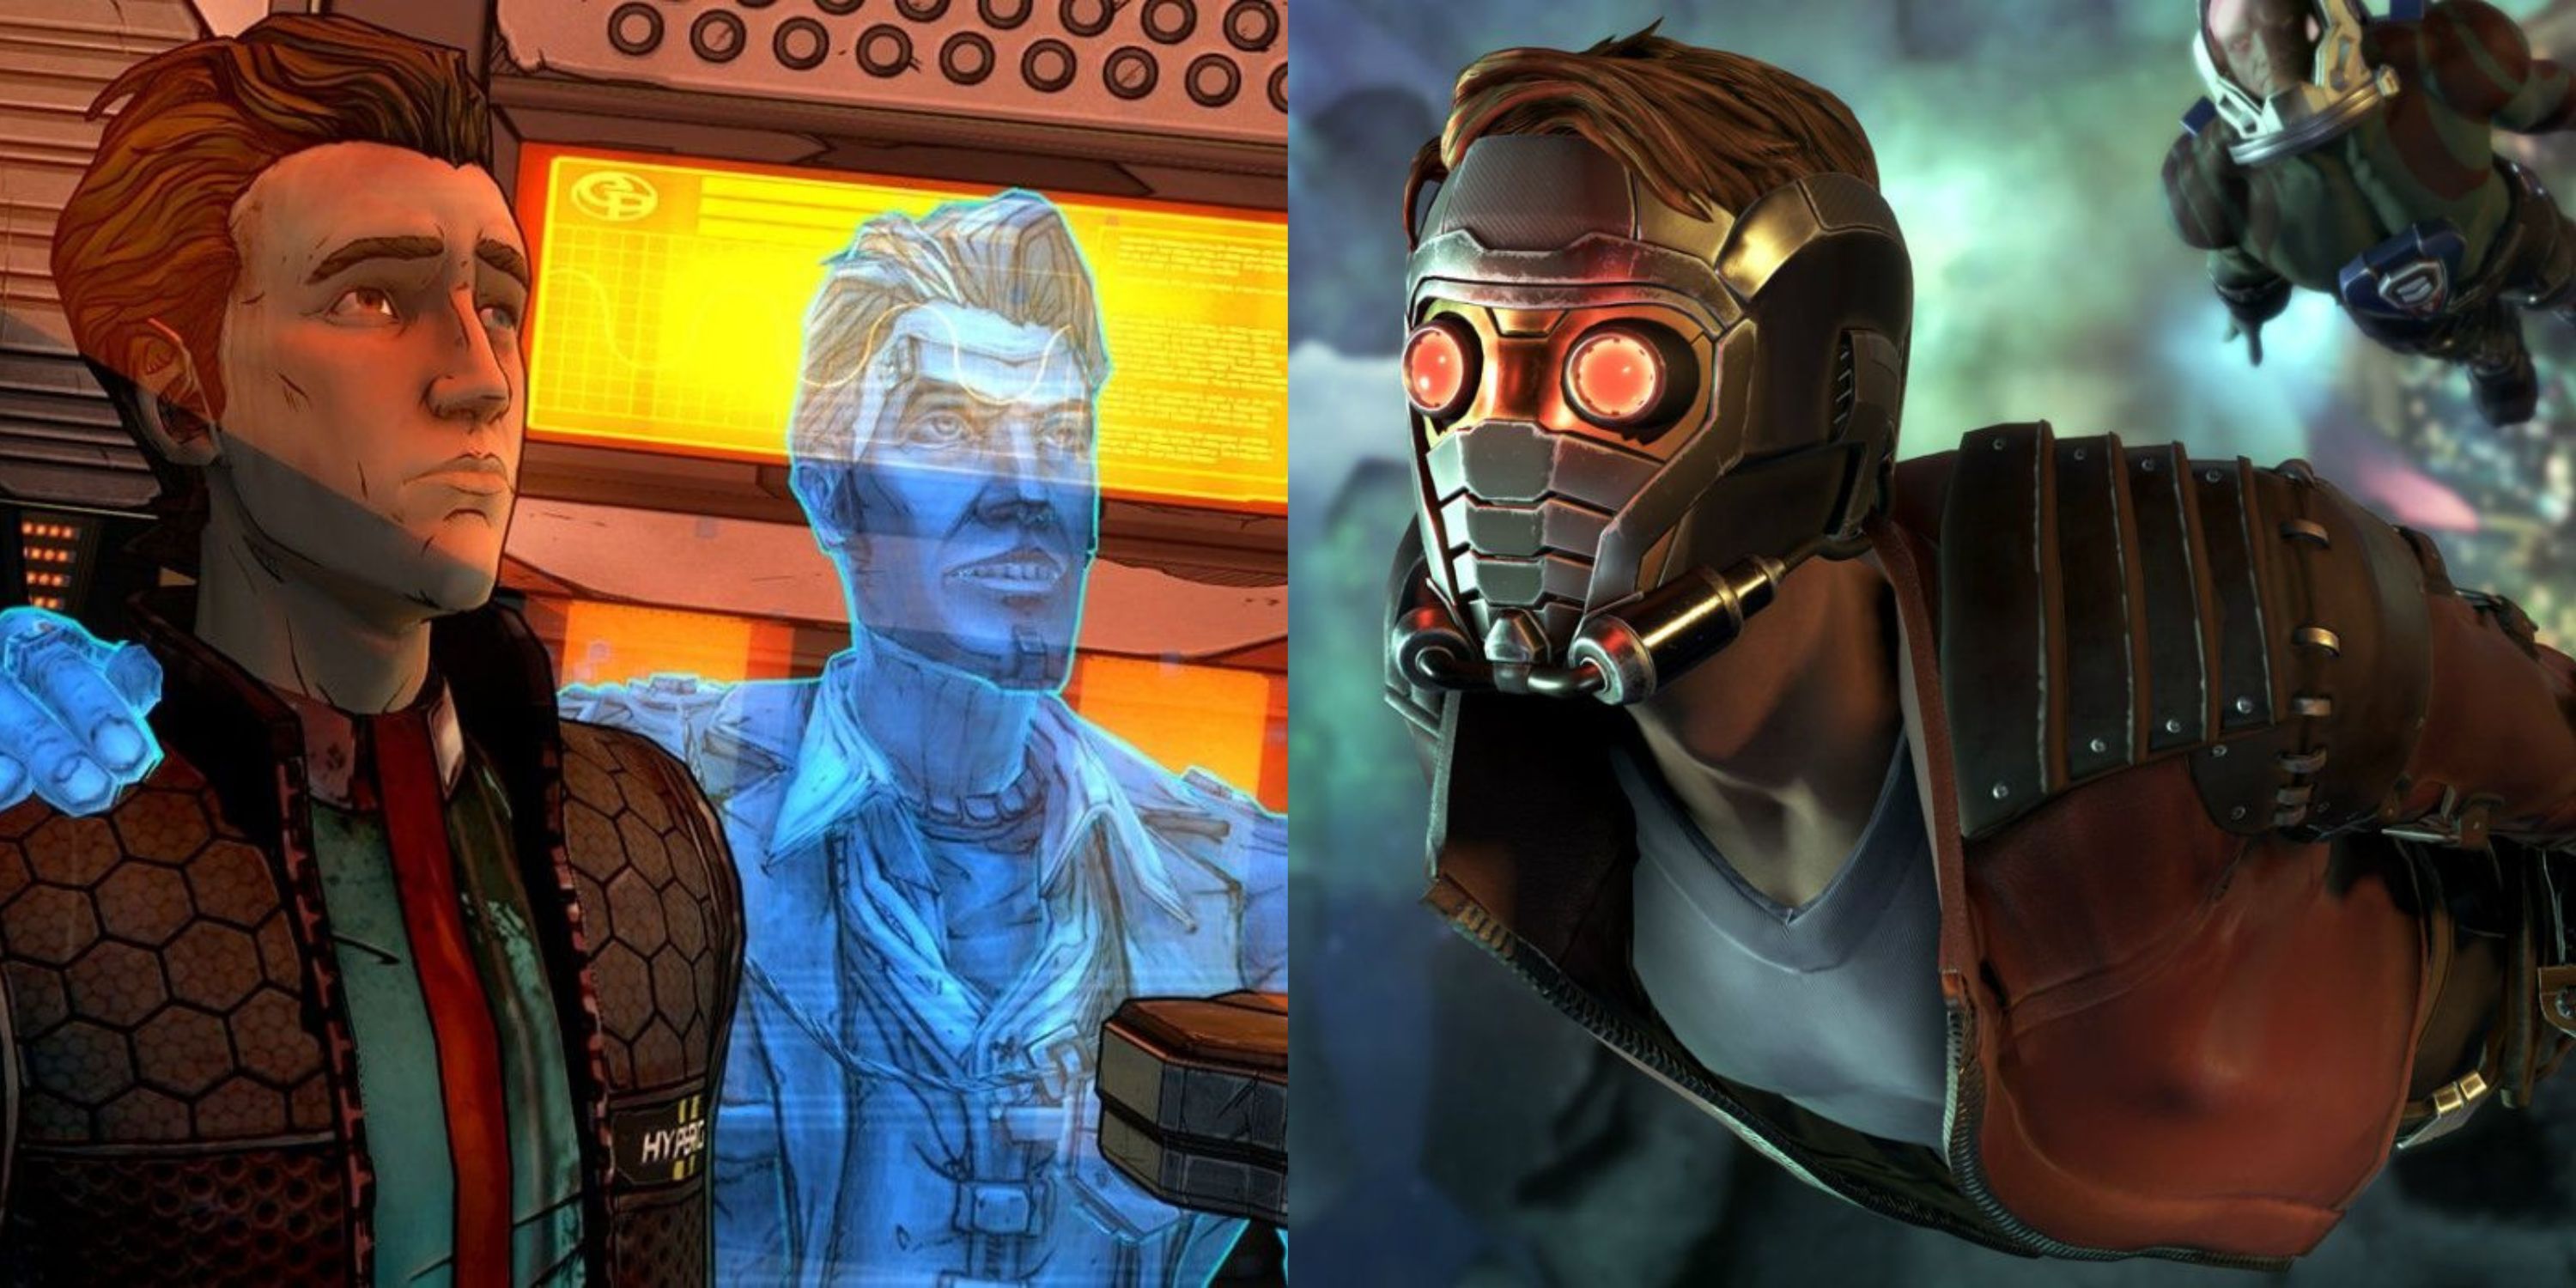 Featured image gameplay from Tales from the Borderlands and artwork for Marvels Guardians of the Galaxy The Telltale Series